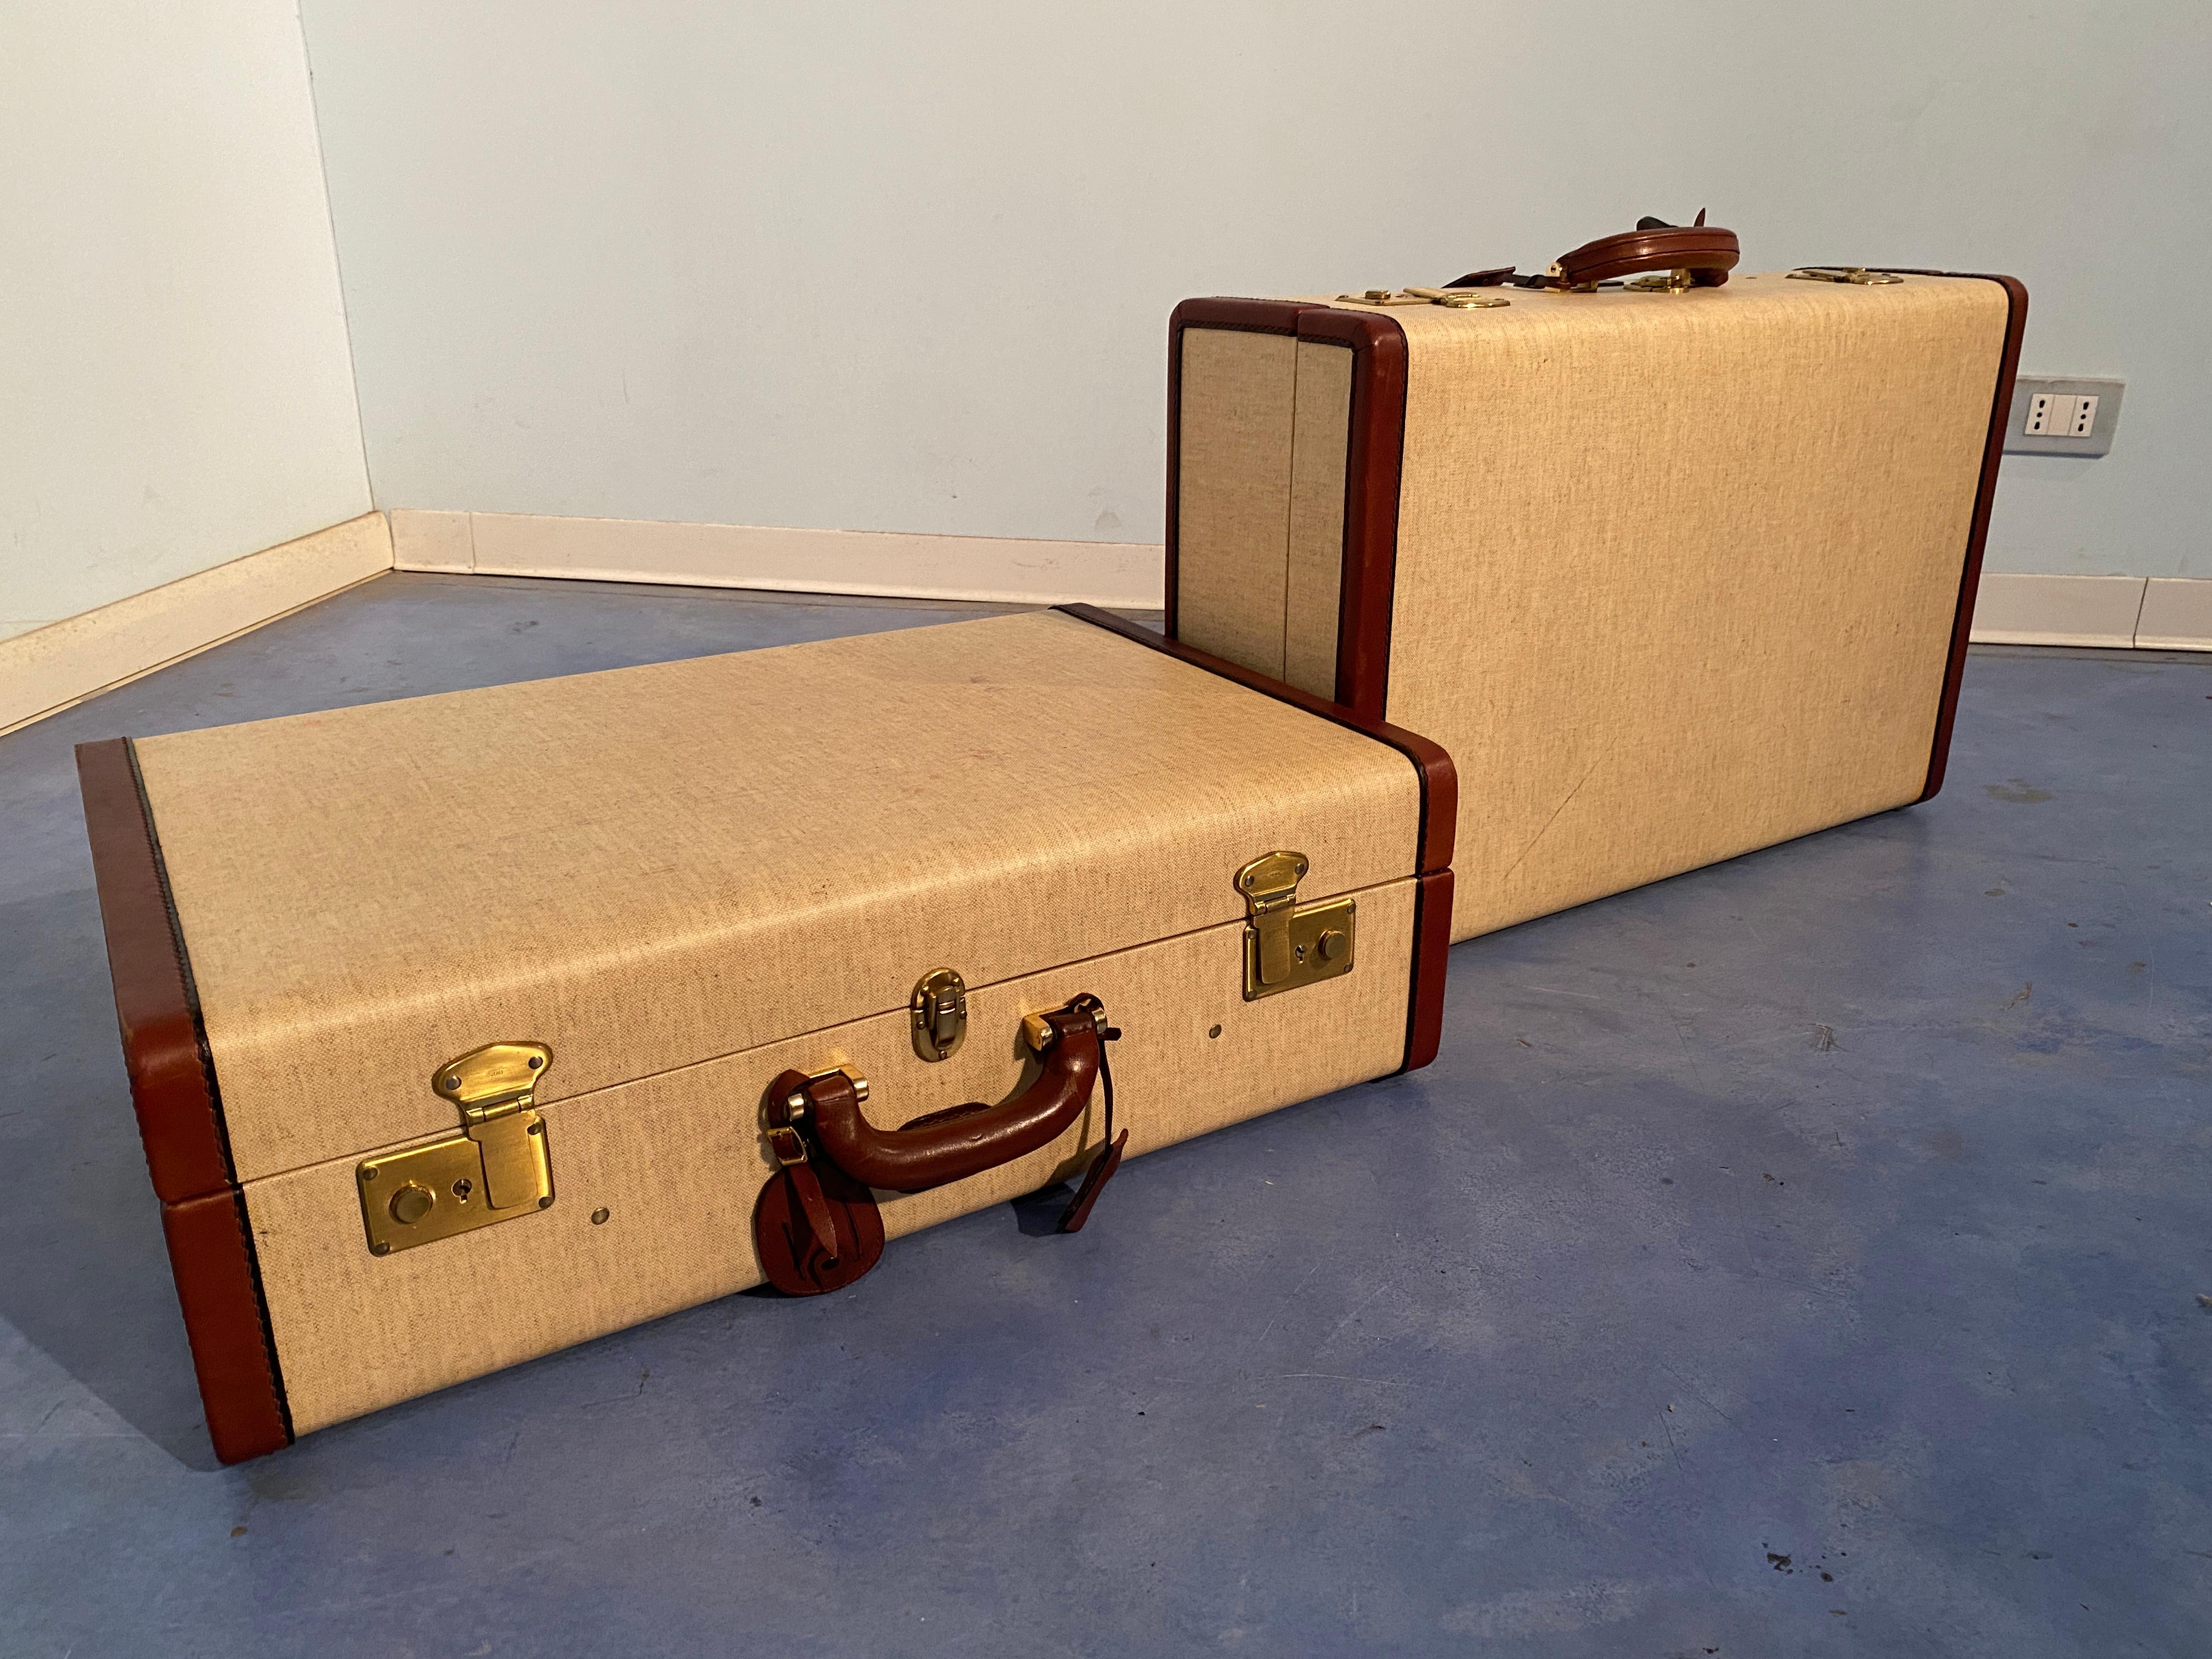 Italian Mid-Century Moder Luggages or Suitcases Mèlange Color, Set of Two, 1960 For Sale 1